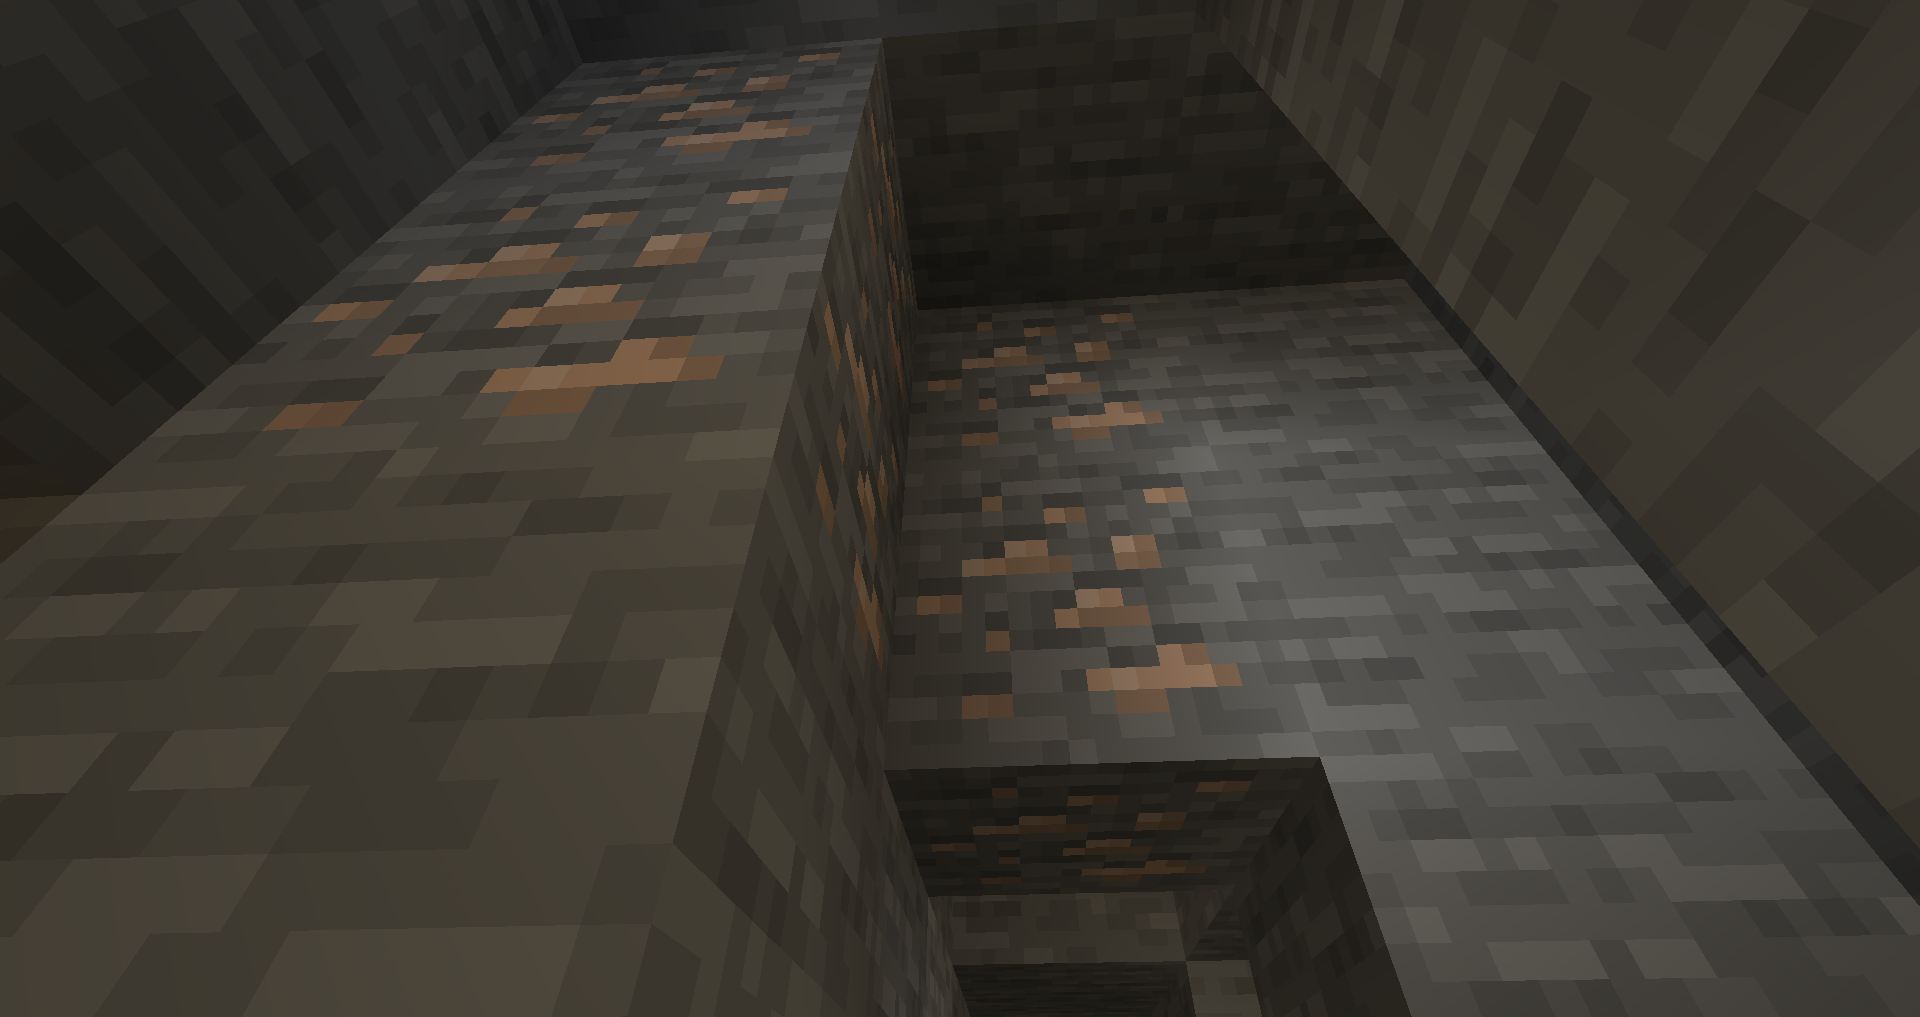 A wall of Cobblestone in Minecraft with some Iron Ore blocks speckled in